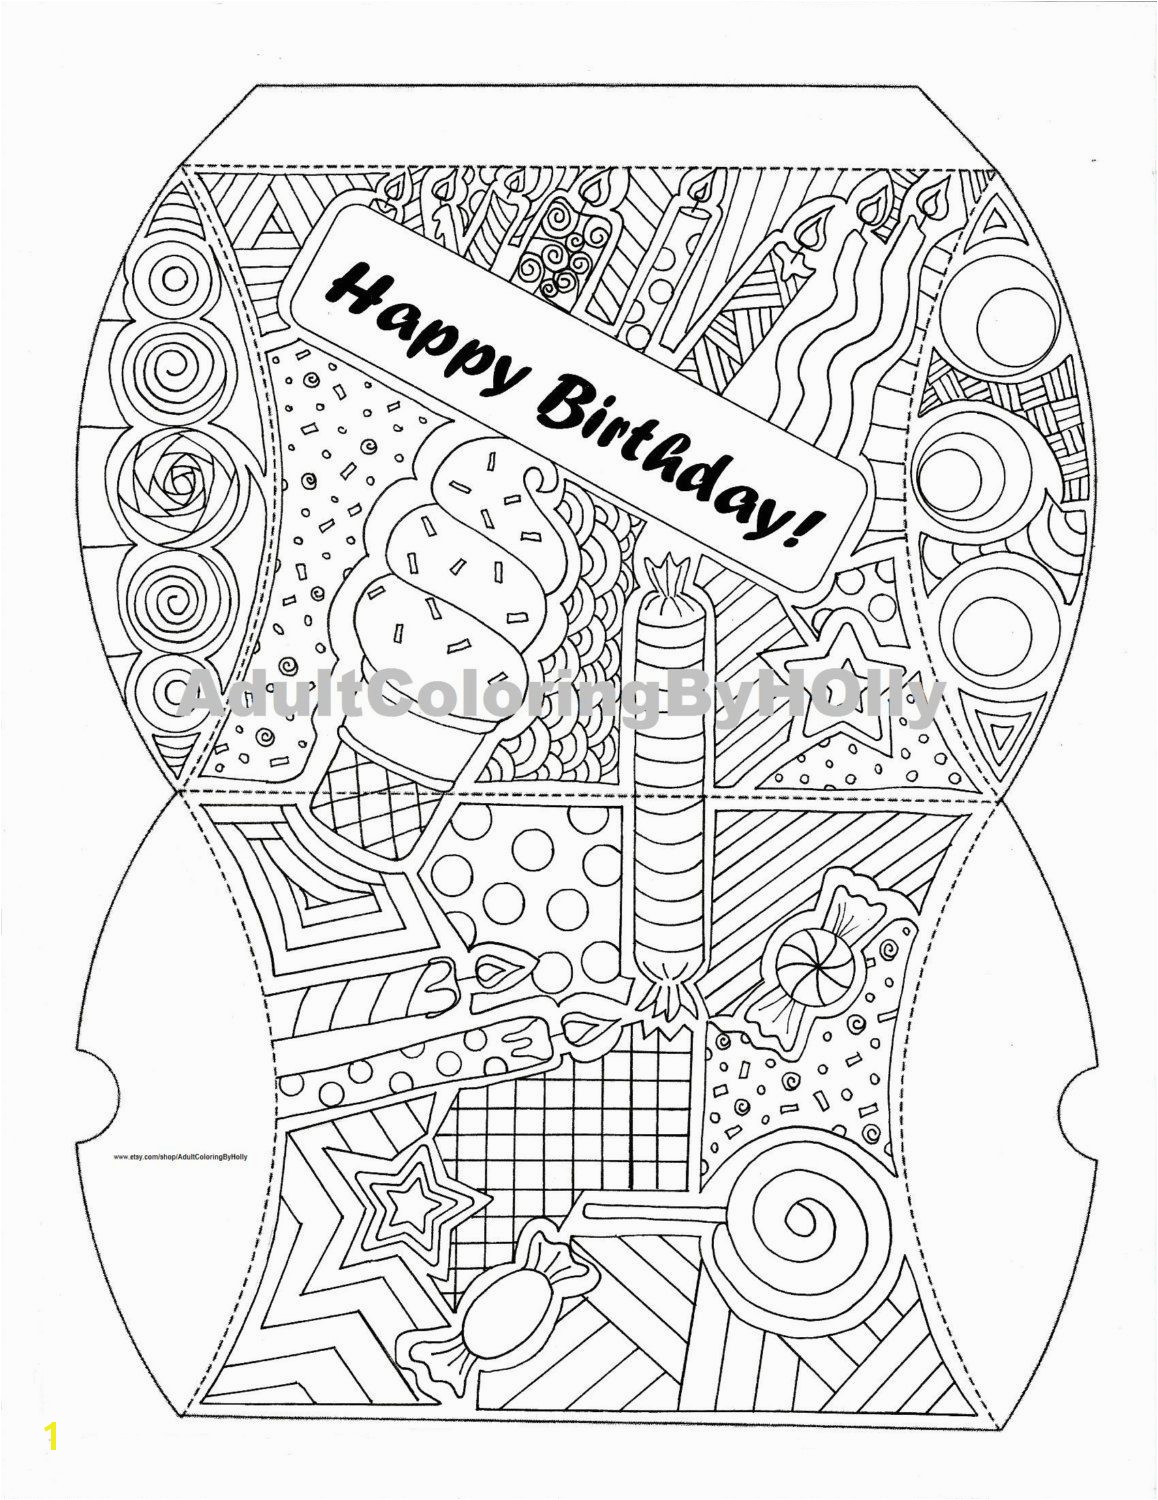 Everything Etsy Coloring Pages Birthday Pillow Box by Adultcoloringbyholly On Etsy